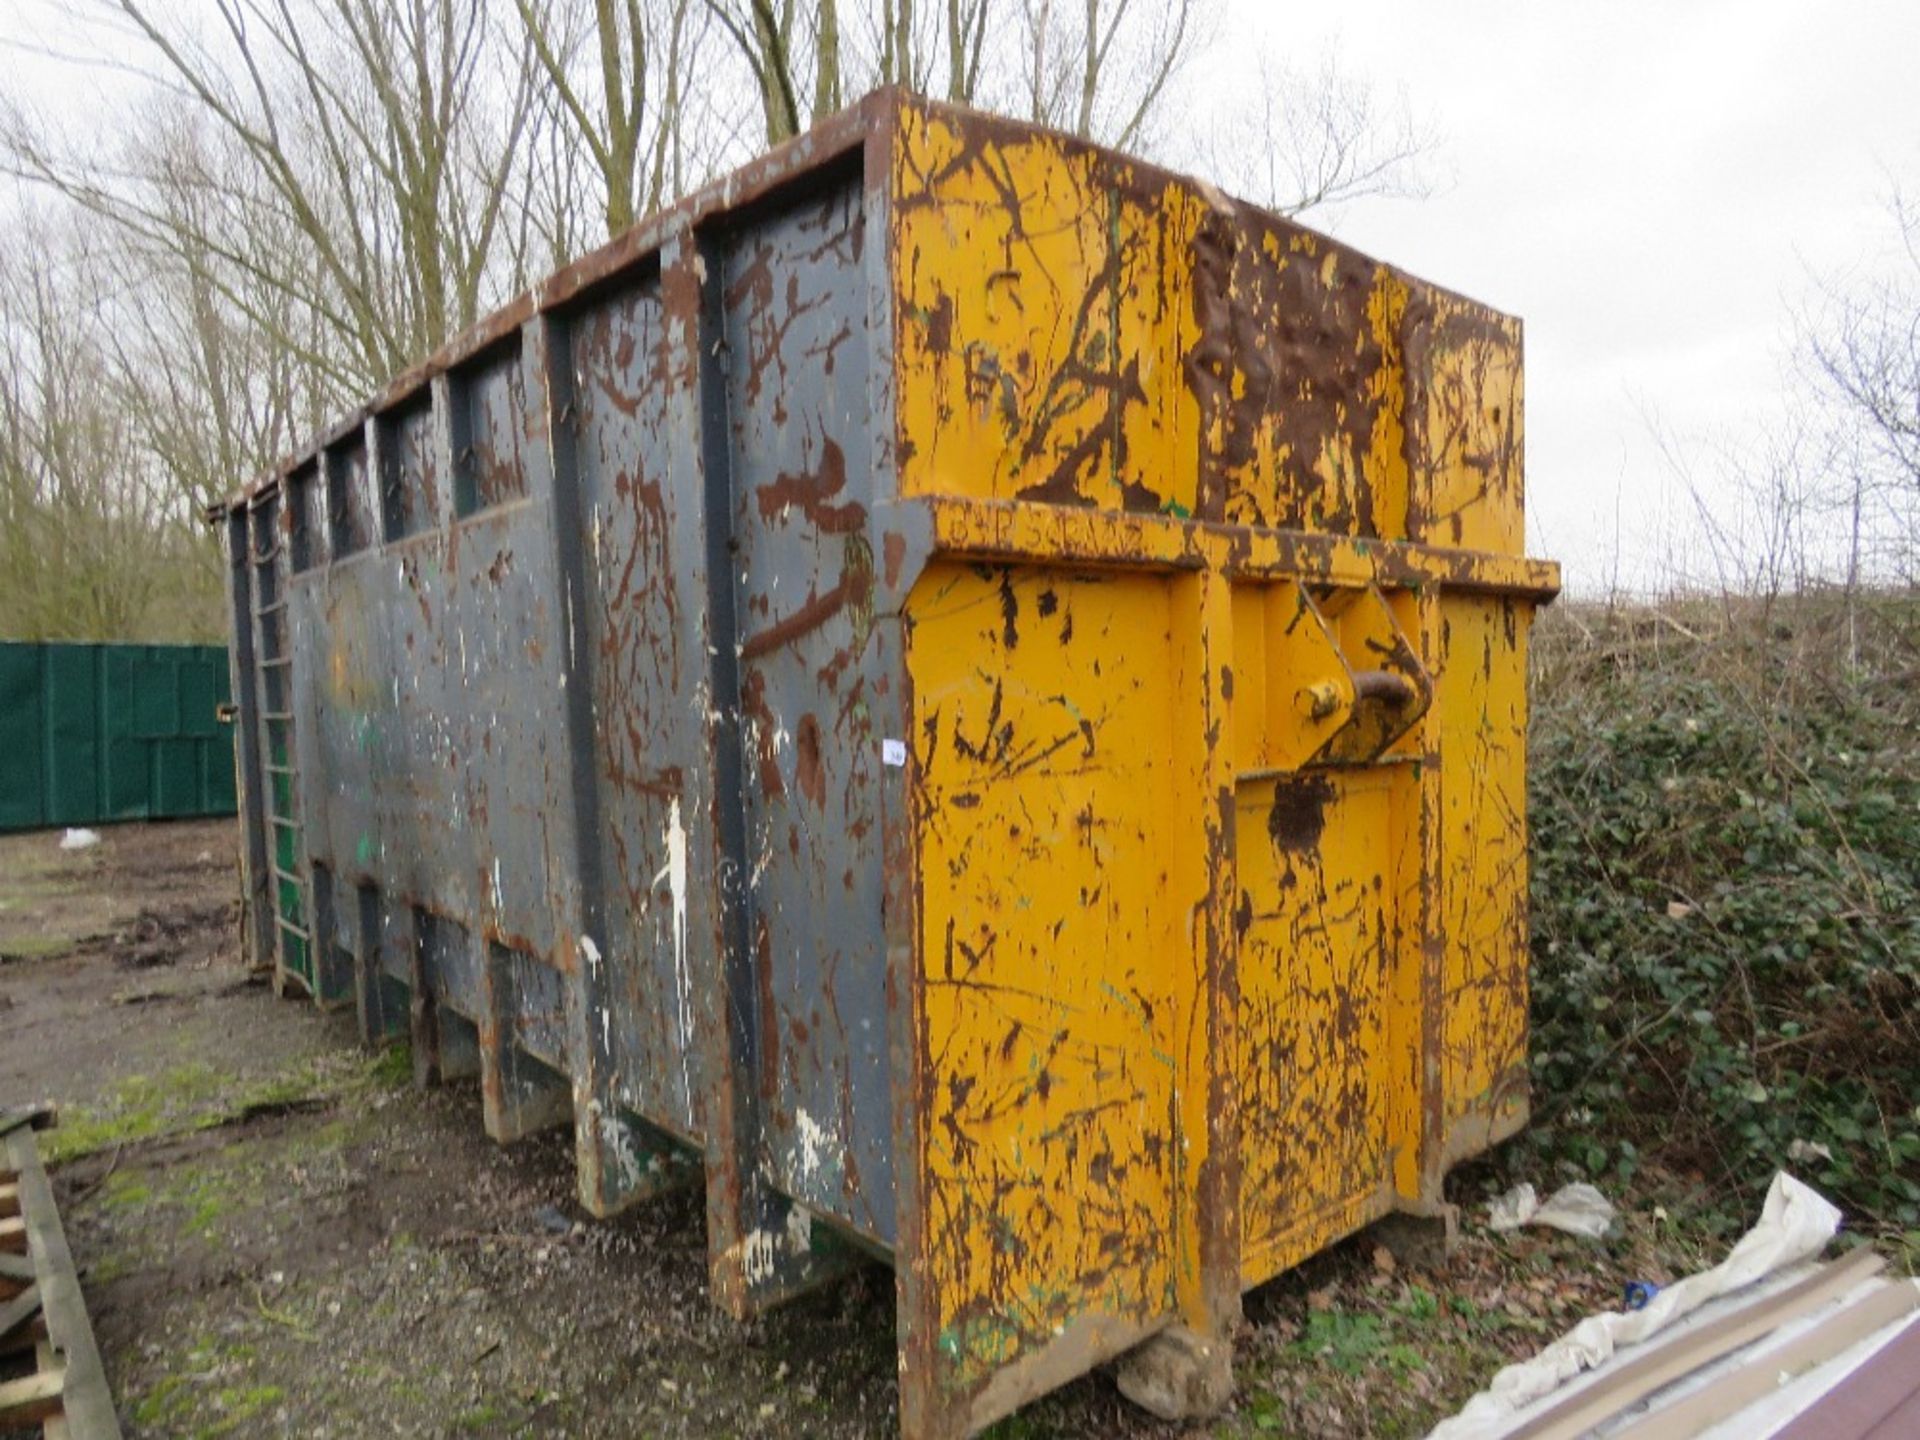 HOOK LOADER 40 YARD ROLLONOFF TYPE WASTE CONTAINER BIN, SOURCED FROM DEPOT CLOSURE.